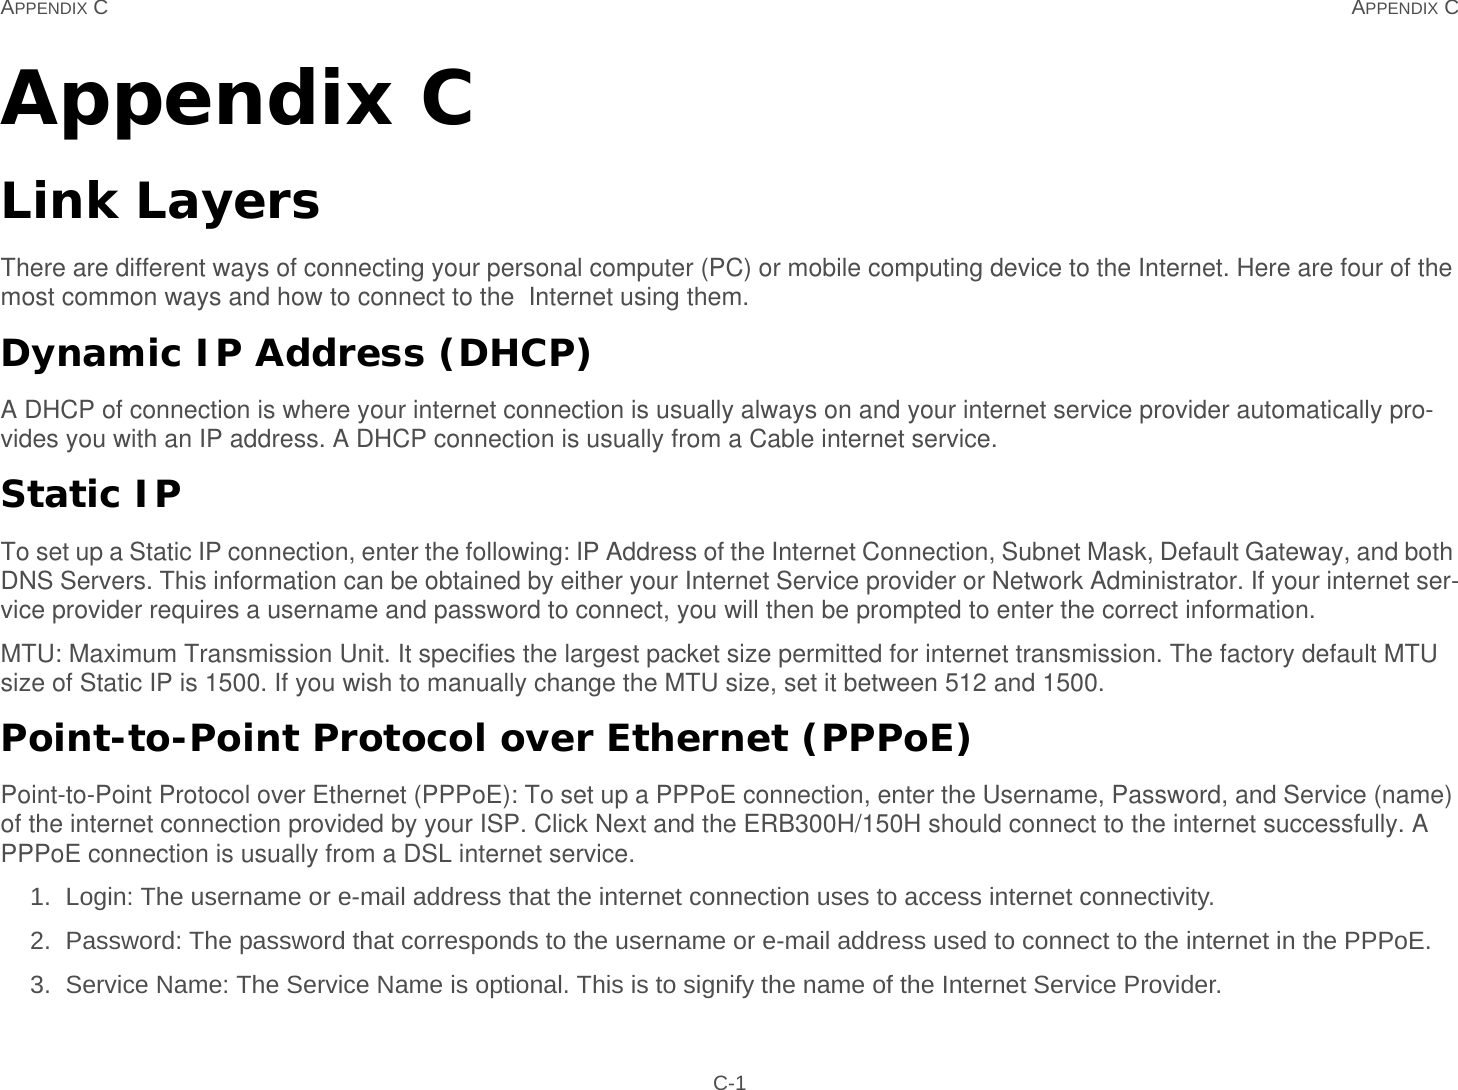 APPENDIX C APPENDIX C C-1Appendix CLink LayersThere are different ways of connecting your personal computer (PC) or mobile computing device to the Internet. Here are four of the most common ways and how to connect to the  Internet using them.Dynamic IP Address (DHCP)A DHCP of connection is where your internet connection is usually always on and your internet service provider automatically pro-vides you with an IP address. A DHCP connection is usually from a Cable internet service.Static IPTo set up a Static IP connection, enter the following: IP Address of the Internet Connection, Subnet Mask, Default Gateway, and both DNS Servers. This information can be obtained by either your Internet Service provider or Network Administrator. If your internet ser-vice provider requires a username and password to connect, you will then be prompted to enter the correct information.MTU: Maximum Transmission Unit. It specifies the largest packet size permitted for internet transmission. The factory default MTU size of Static IP is 1500. If you wish to manually change the MTU size, set it between 512 and 1500. Point-to-Point Protocol over Ethernet (PPPoE)Point-to-Point Protocol over Ethernet (PPPoE): To set up a PPPoE connection, enter the Username, Password, and Service (name) of the internet connection provided by your ISP. Click Next and the ERB300H/150H should connect to the internet successfully. A PPPoE connection is usually from a DSL internet service.1. Login: The username or e-mail address that the internet connection uses to access internet connectivity.2. Password: The password that corresponds to the username or e-mail address used to connect to the internet in the PPPoE.3. Service Name: The Service Name is optional. This is to signify the name of the Internet Service Provider.